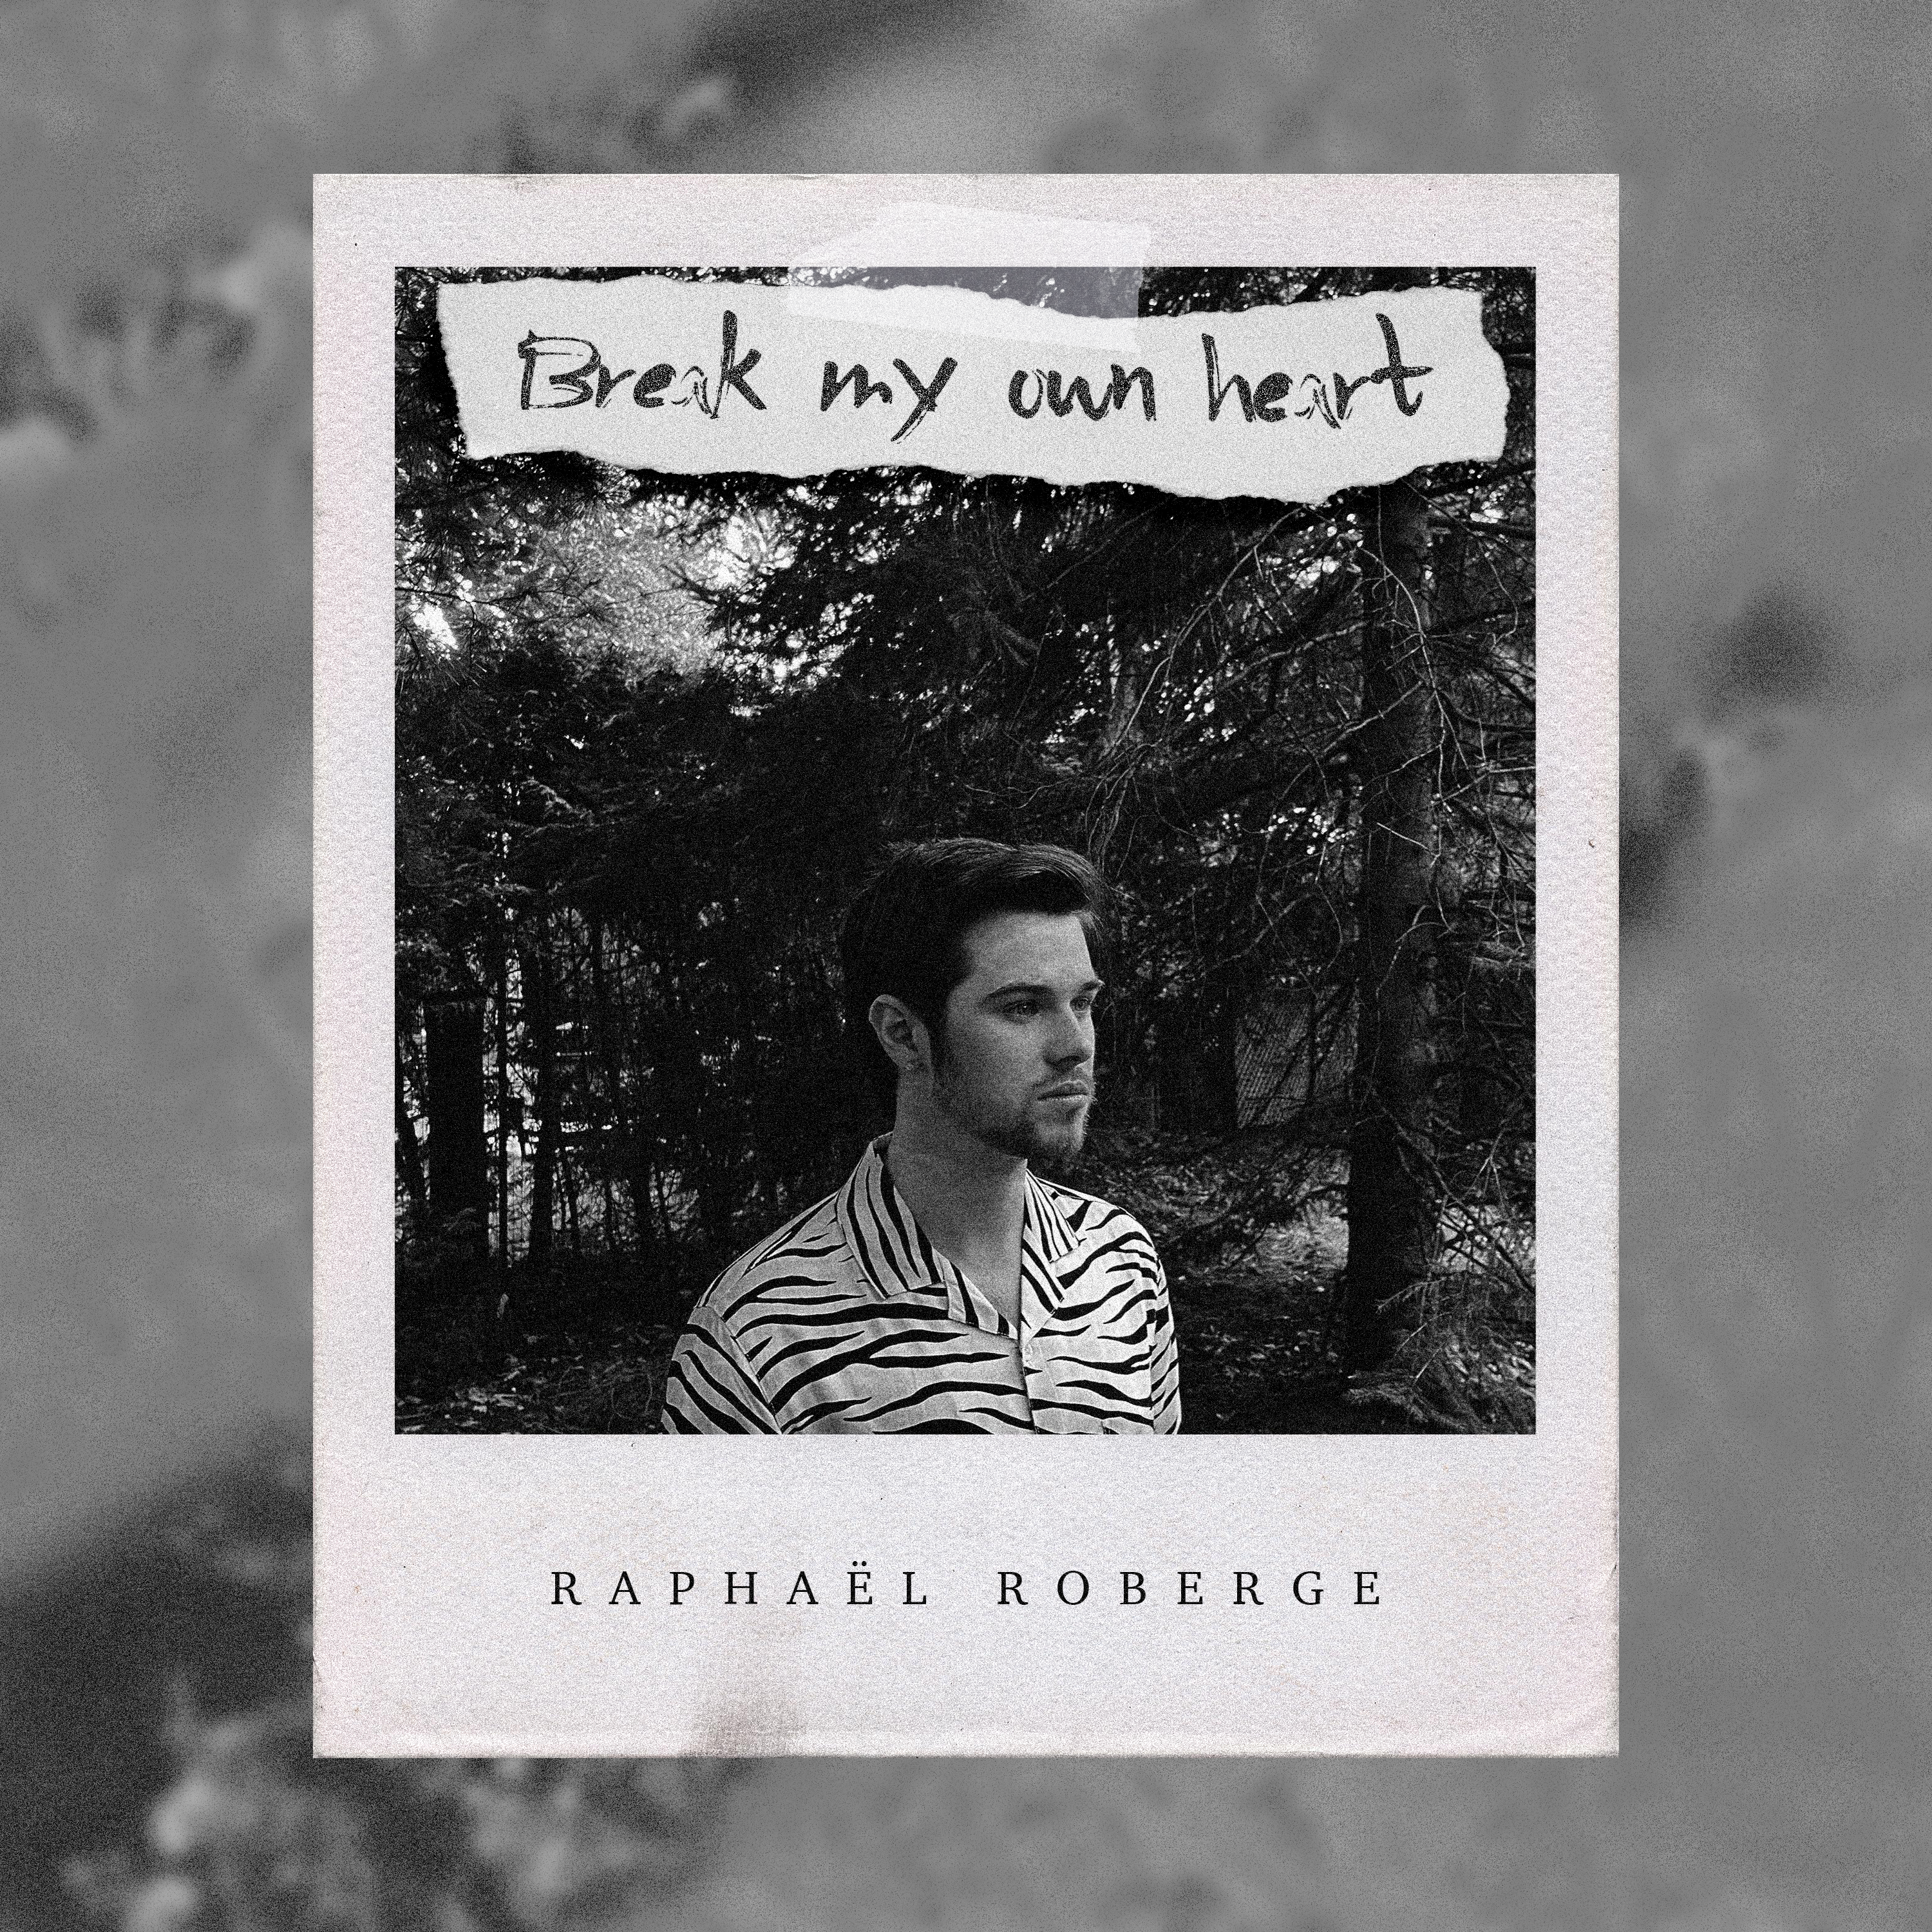 Featured: Official cover art for Raphaël Roberge's latest single, "Break My Own Heart".